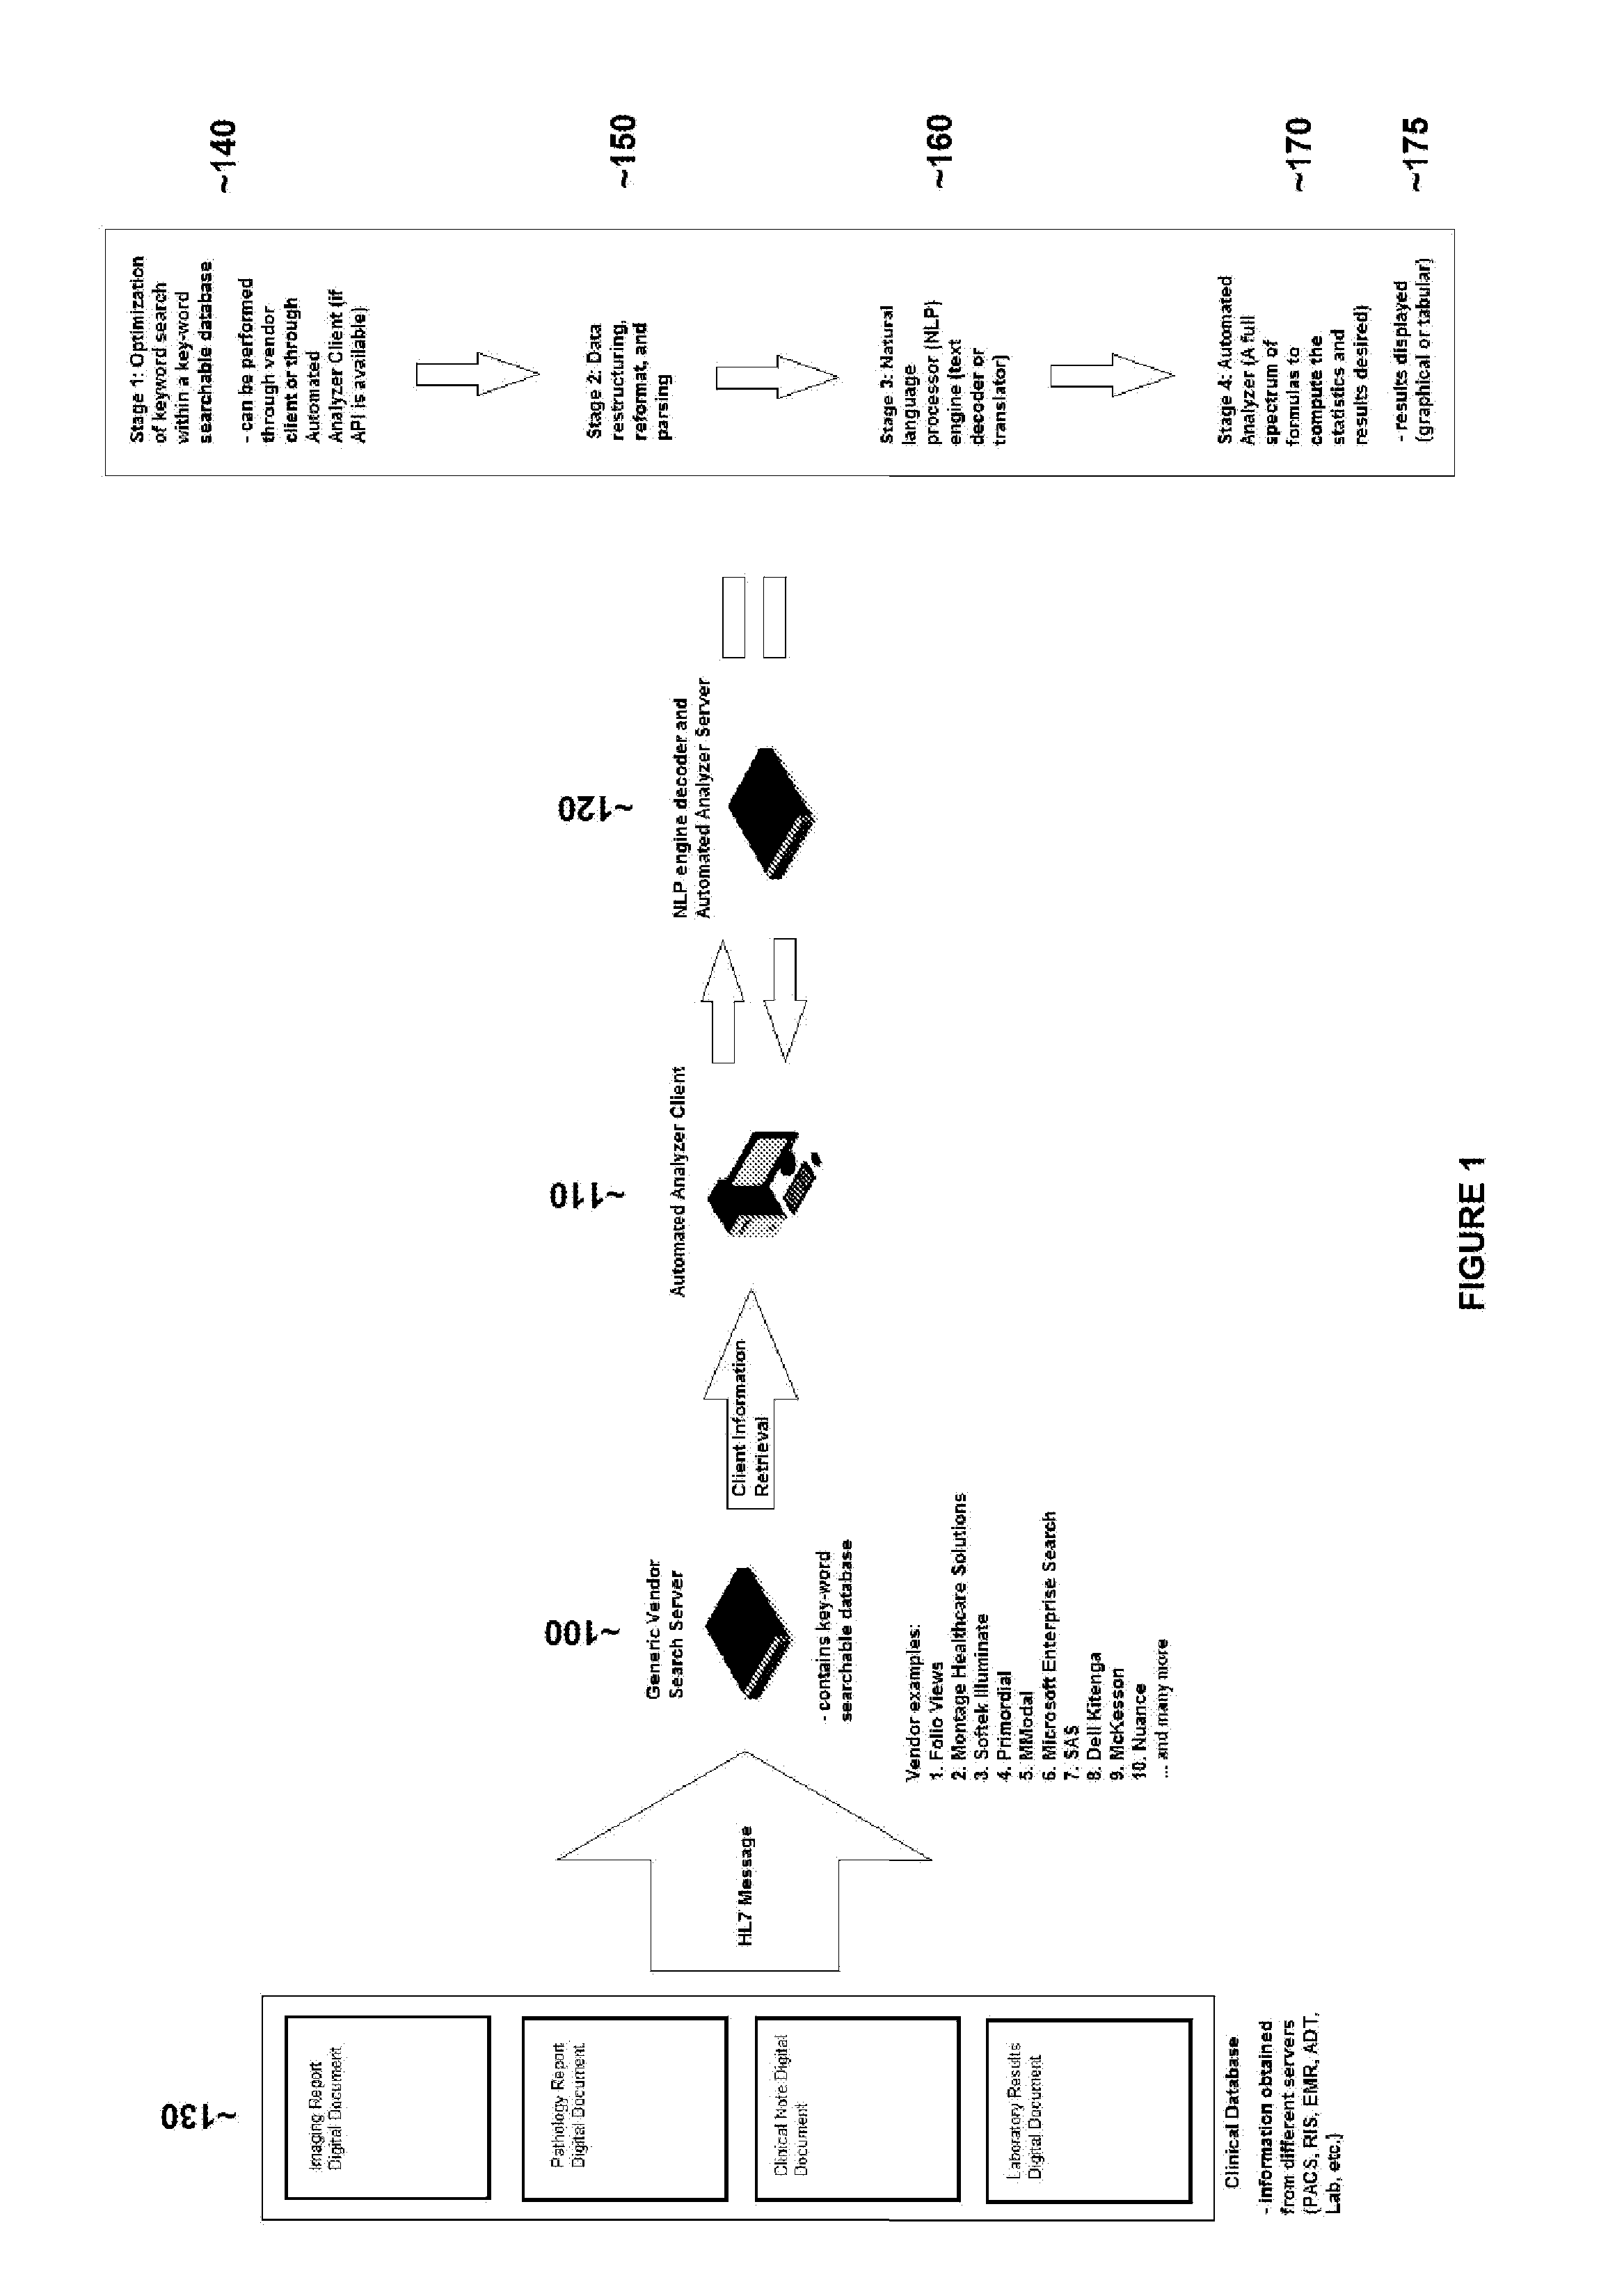 Method for searching a text (or alphanumeric string) database, restructuring and parsing text data (or alphanumeric string), creation/application of a natural language processing engine, and the creation/application of an automated analyzer for the creation of medical reports